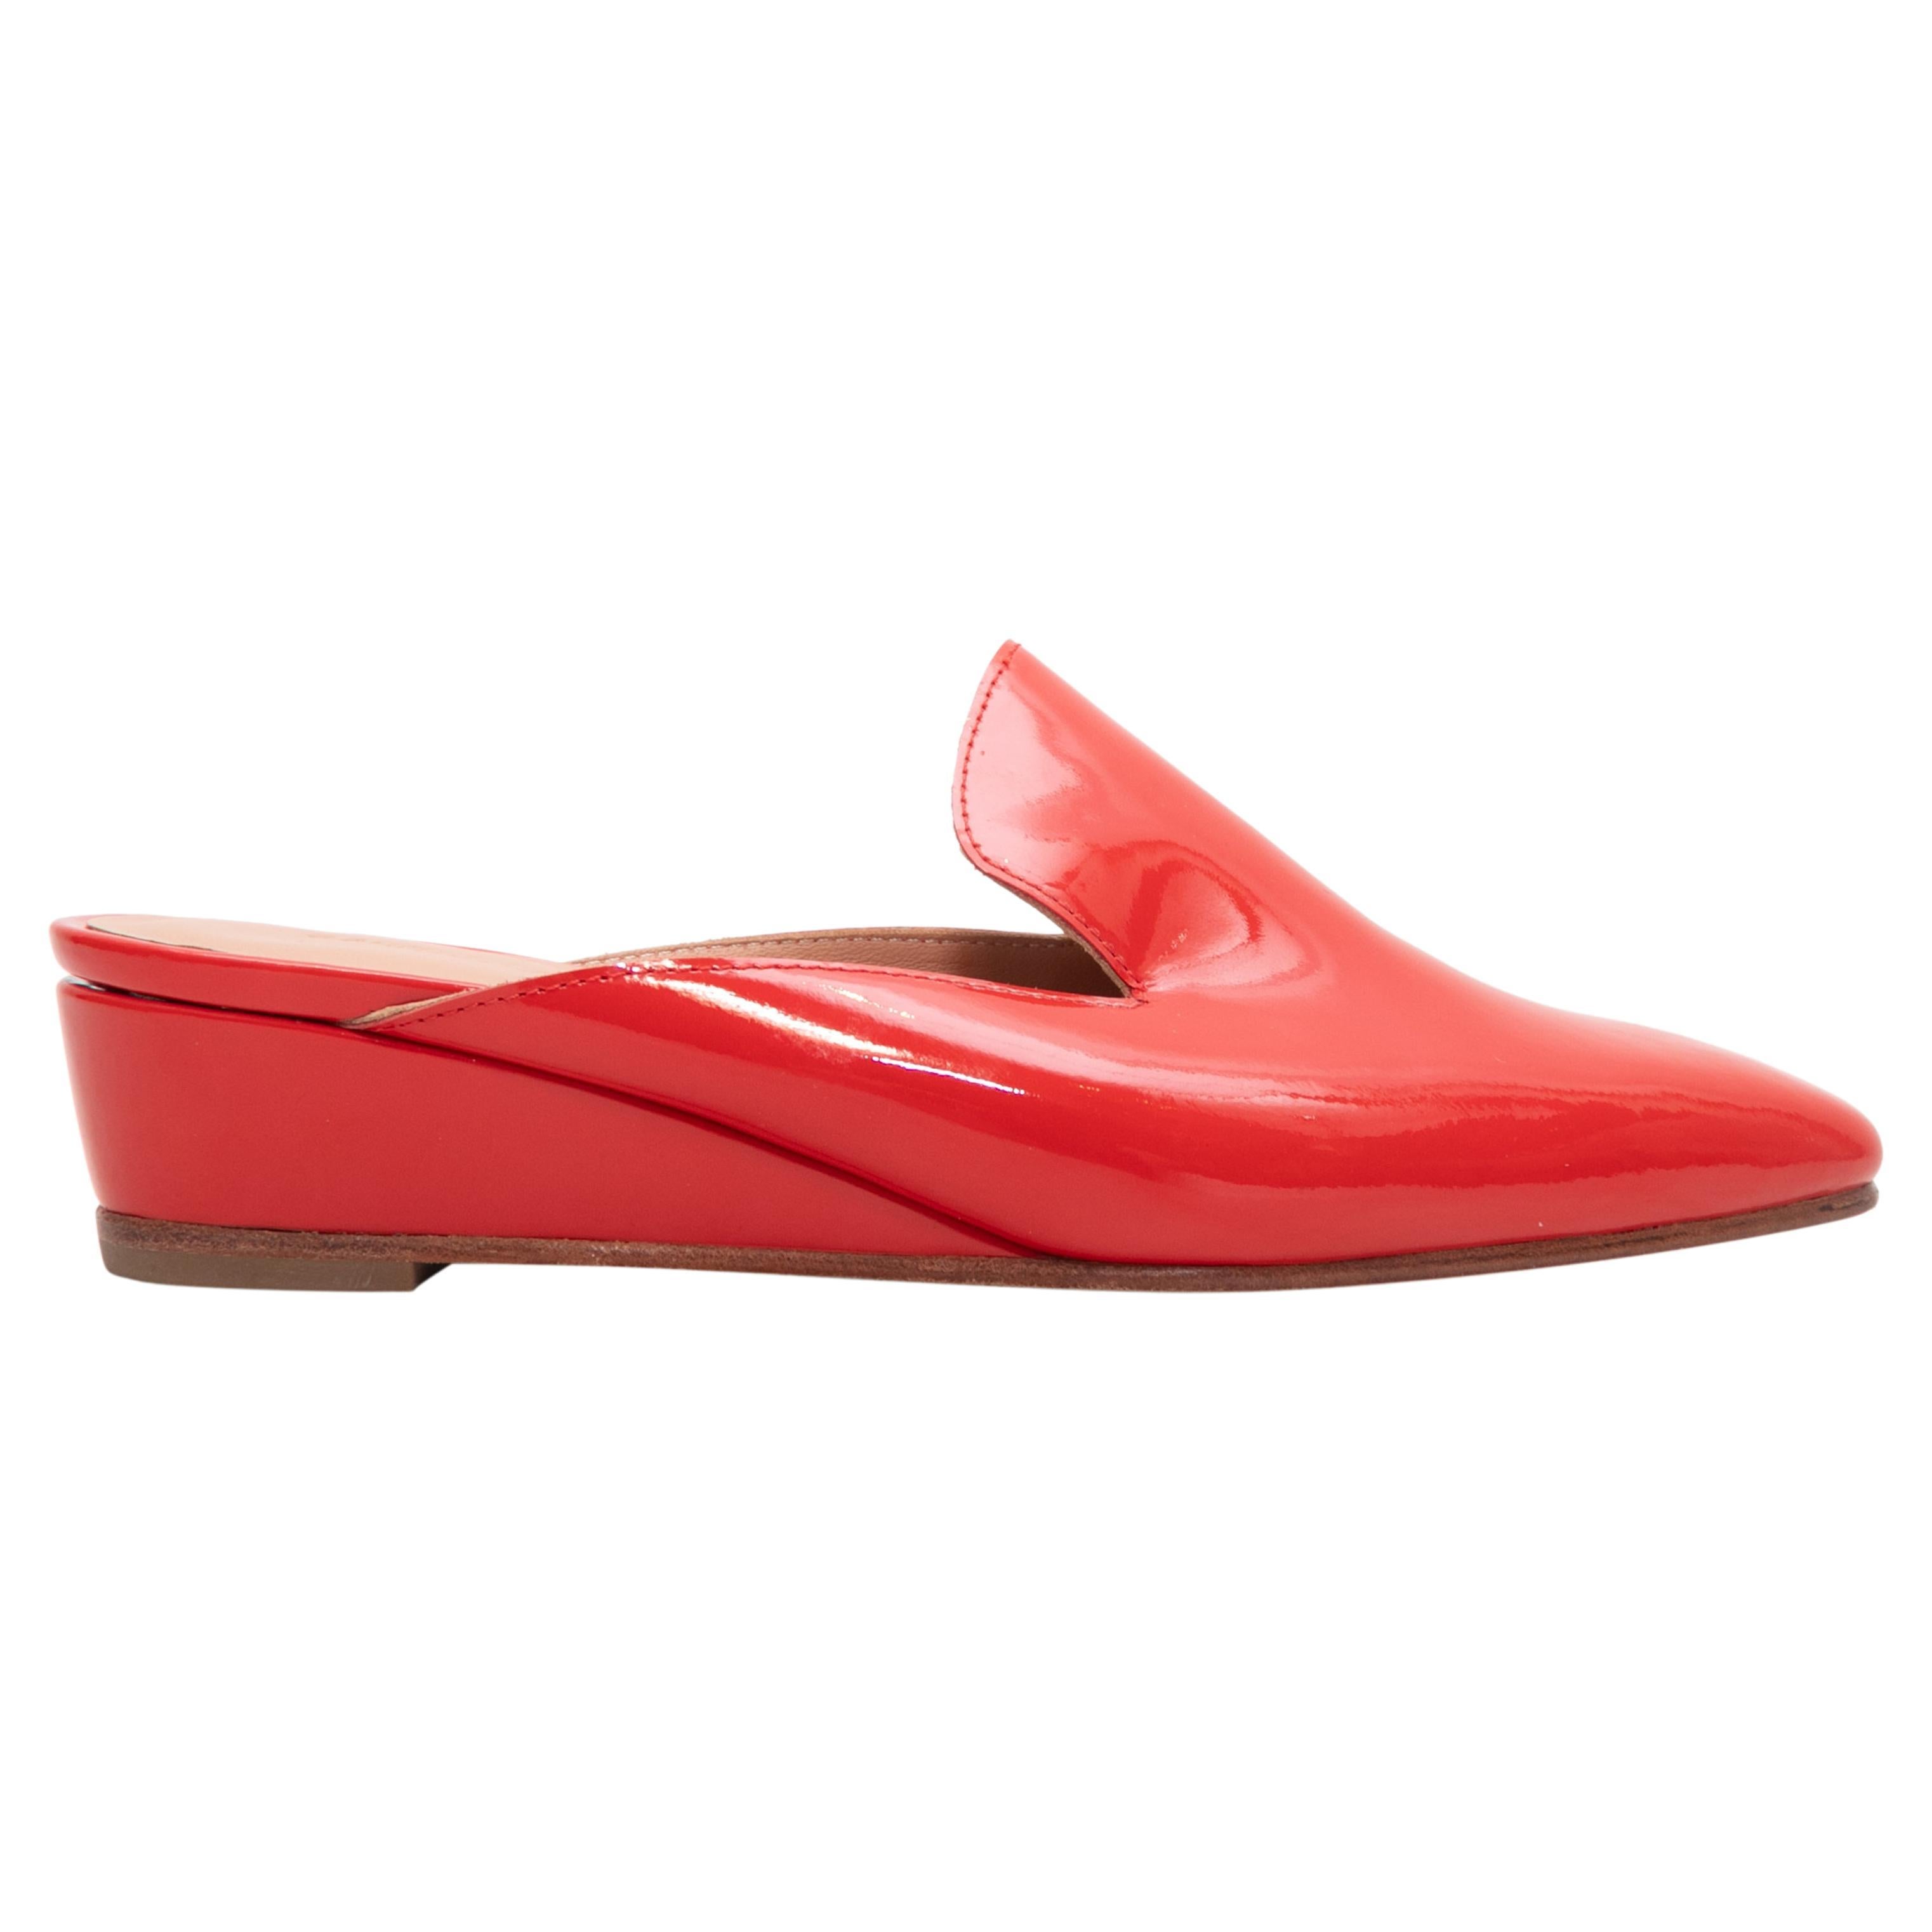 Red Rachel Comey Patent Wedge Mules Size 37 For Sale